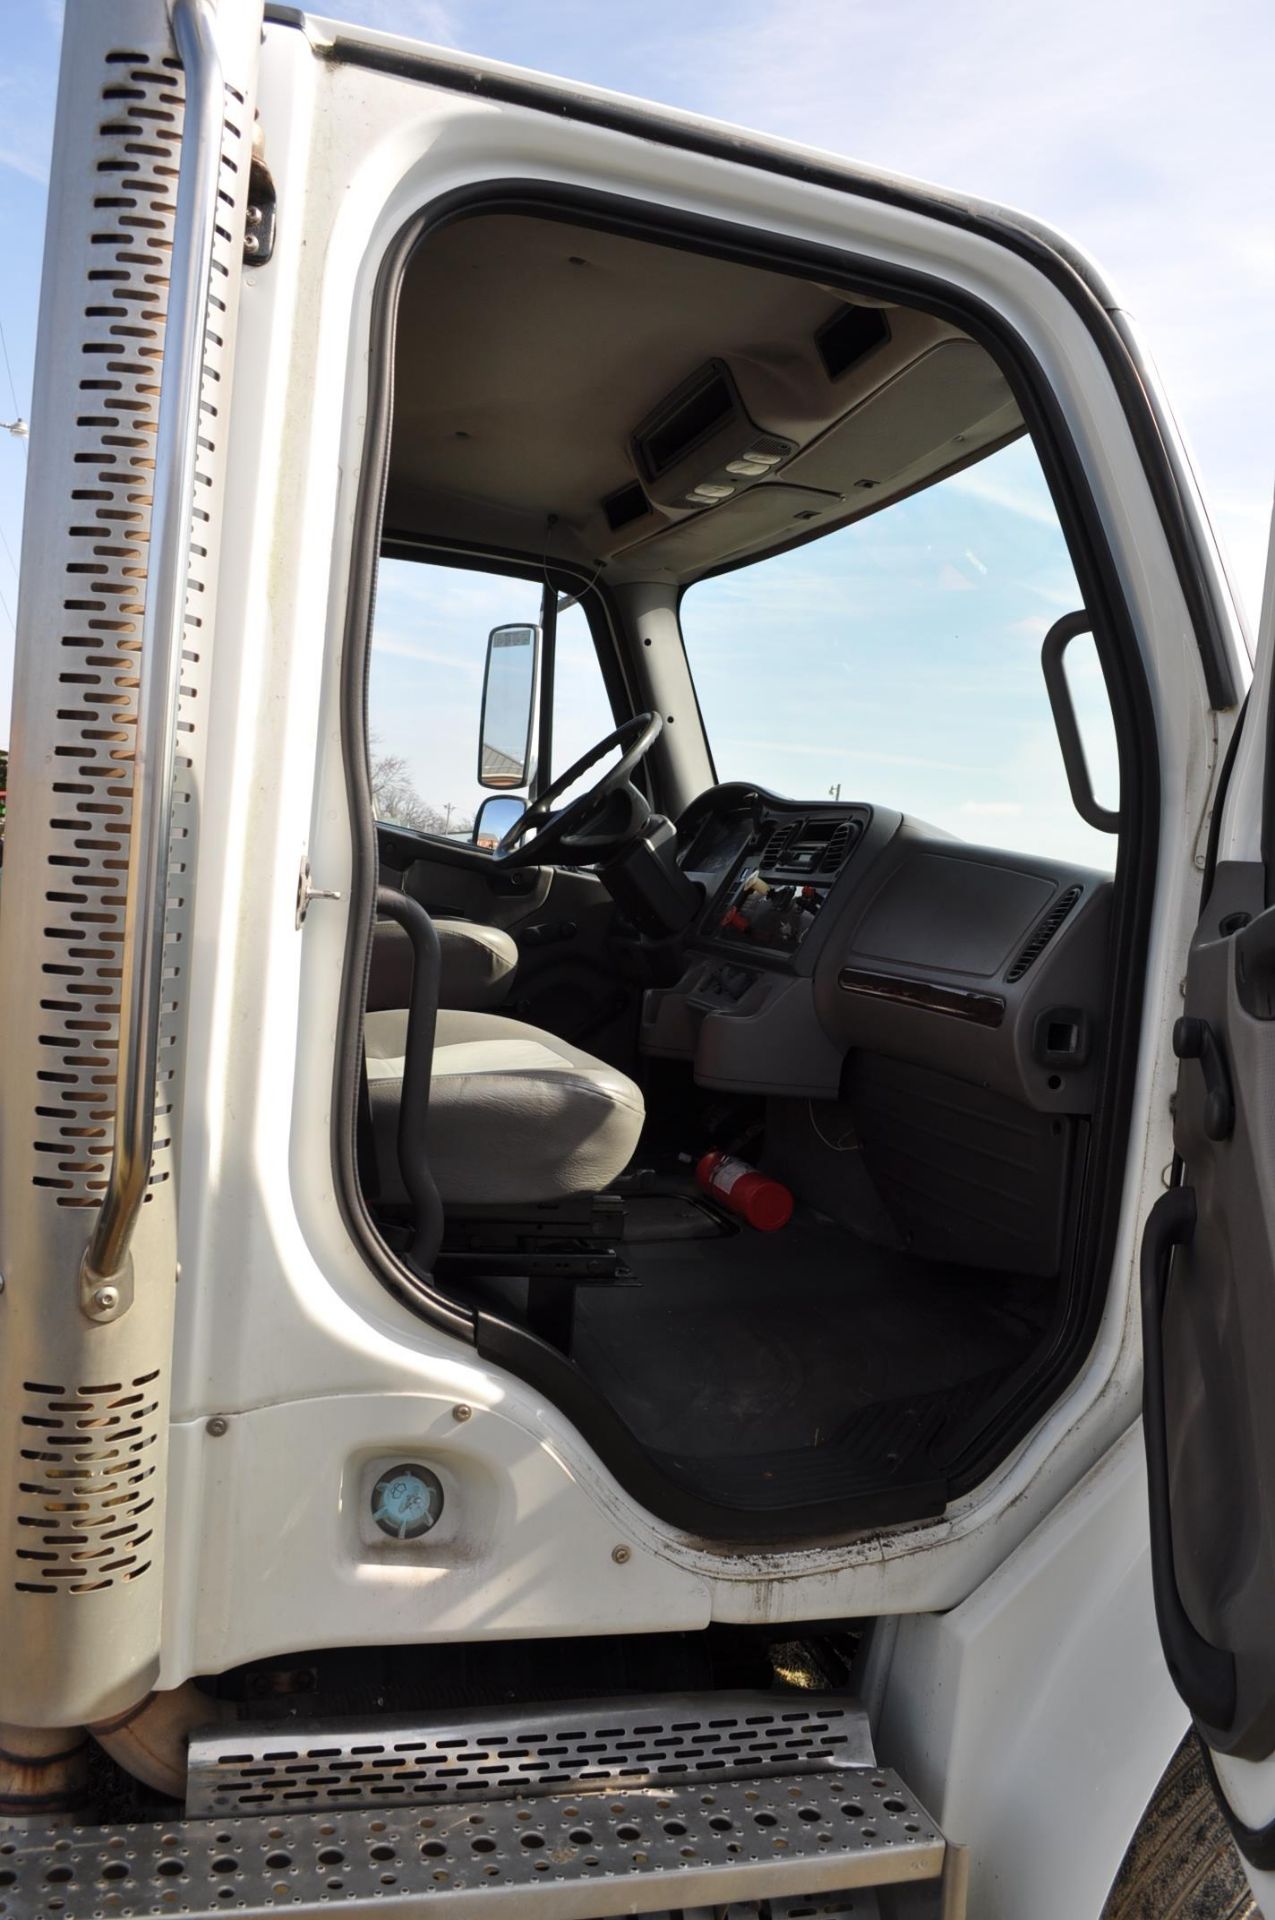 2009 Freightliner M2 semi truck, single axle, day cab, Cummins ISC 260, Allison auto, air ride - Image 22 of 23